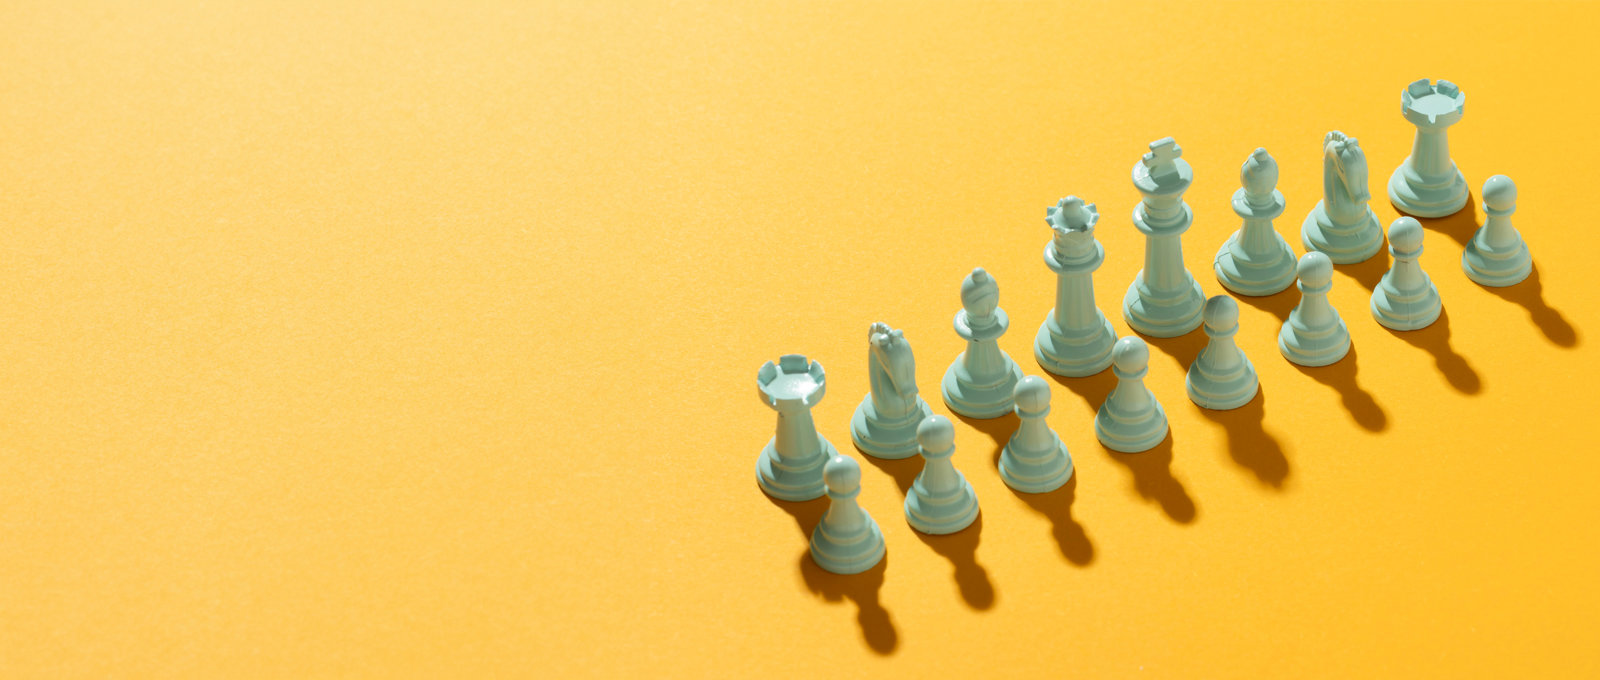 Photograph of a full set of white chess pieces, arranged as they would be for a new game, on a yellow background with strong shadows for each piece